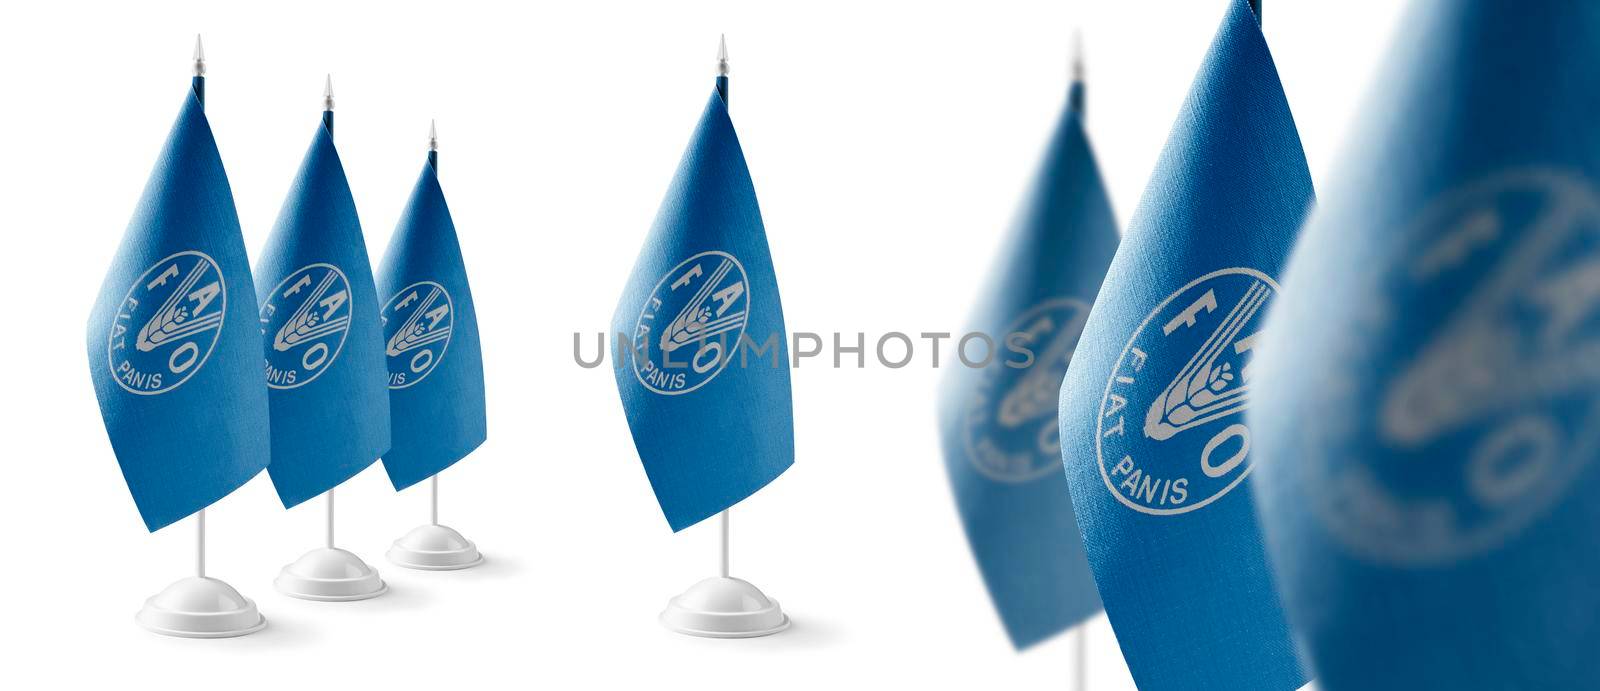 Set of Food and agriculture organization national flags on a white background.